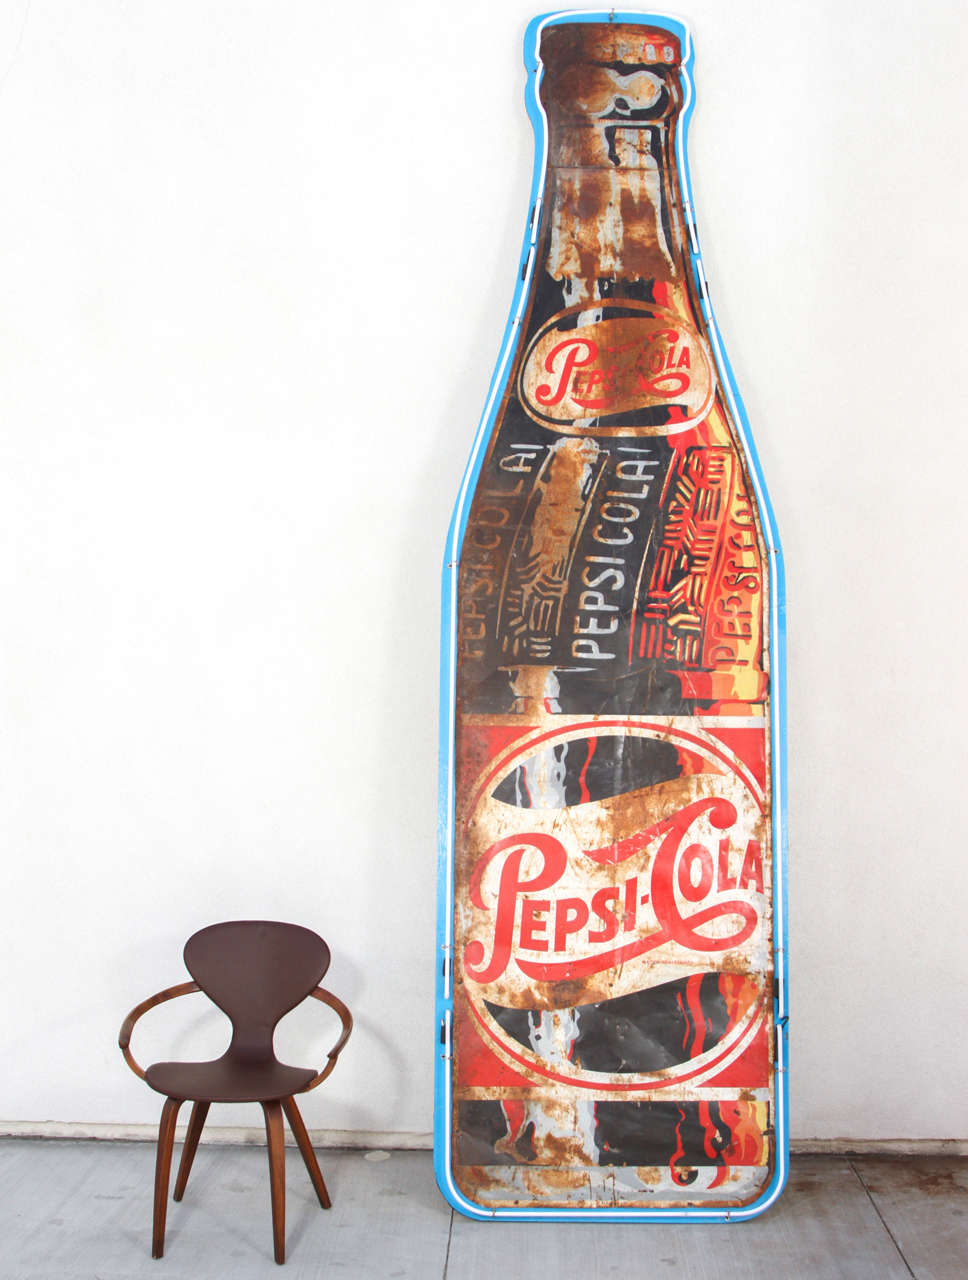 20th Century Very Rare 1950's Monumental-Giant, *Pepsi Cola Bottle* Neon Sign (11.8 Ft Tall)